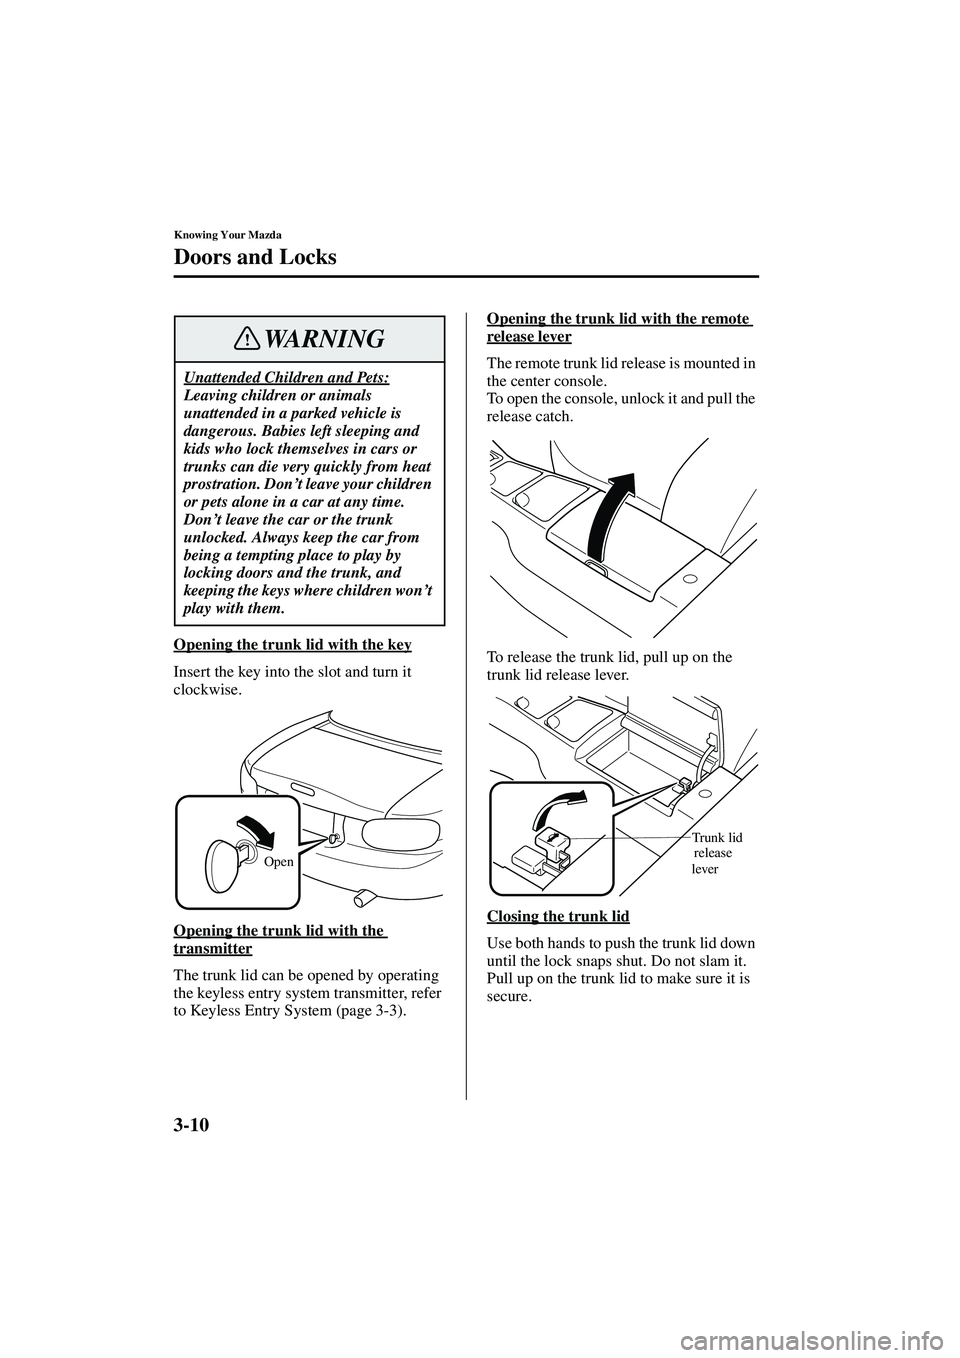 MAZDA MODEL MX-5 MIATA 2003  Owners Manual 3-10
Knowing Your Mazda
Doors and Locks
Form No. 8R09-EA-02G
Opening the trunk lid with the key
Insert the key into the slot and turn it 
clockwise.
Opening the trunk lid with the 
transmitter
The tru